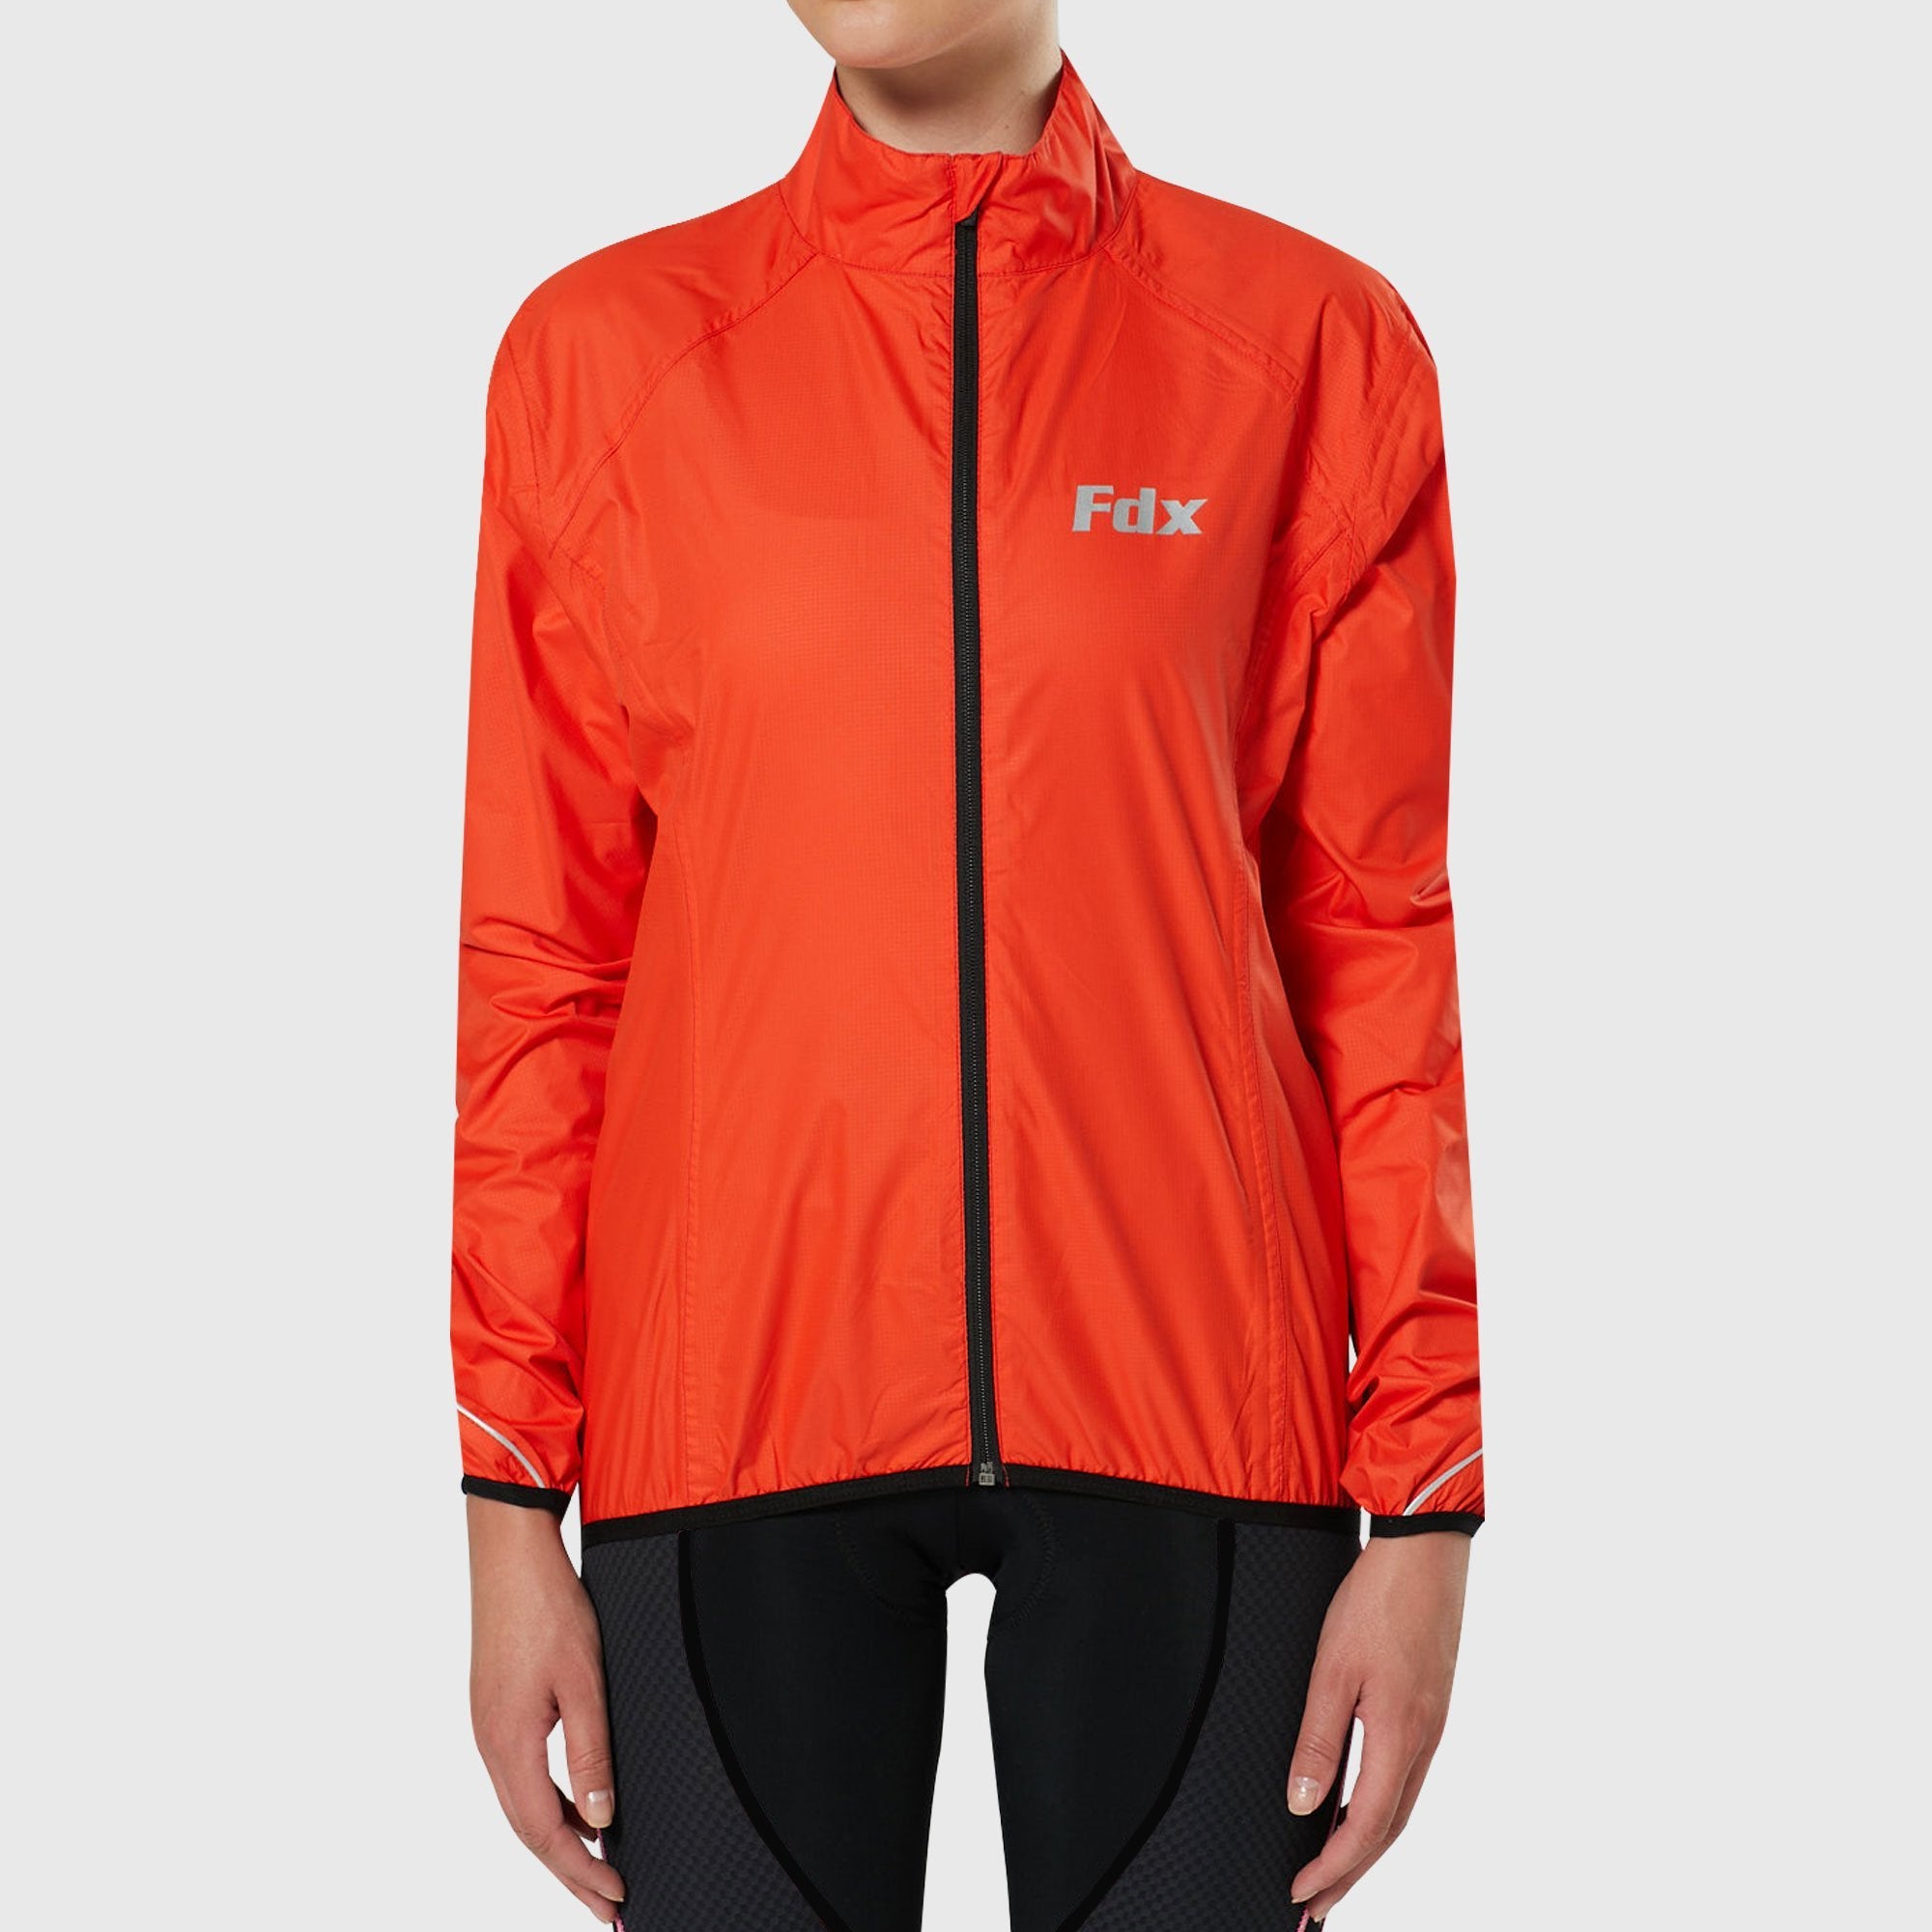 Women’s Orange cycling jacket waterproof breathable quick dry MTB rain top, lightweight packable reflective rain jacket for riding running racing